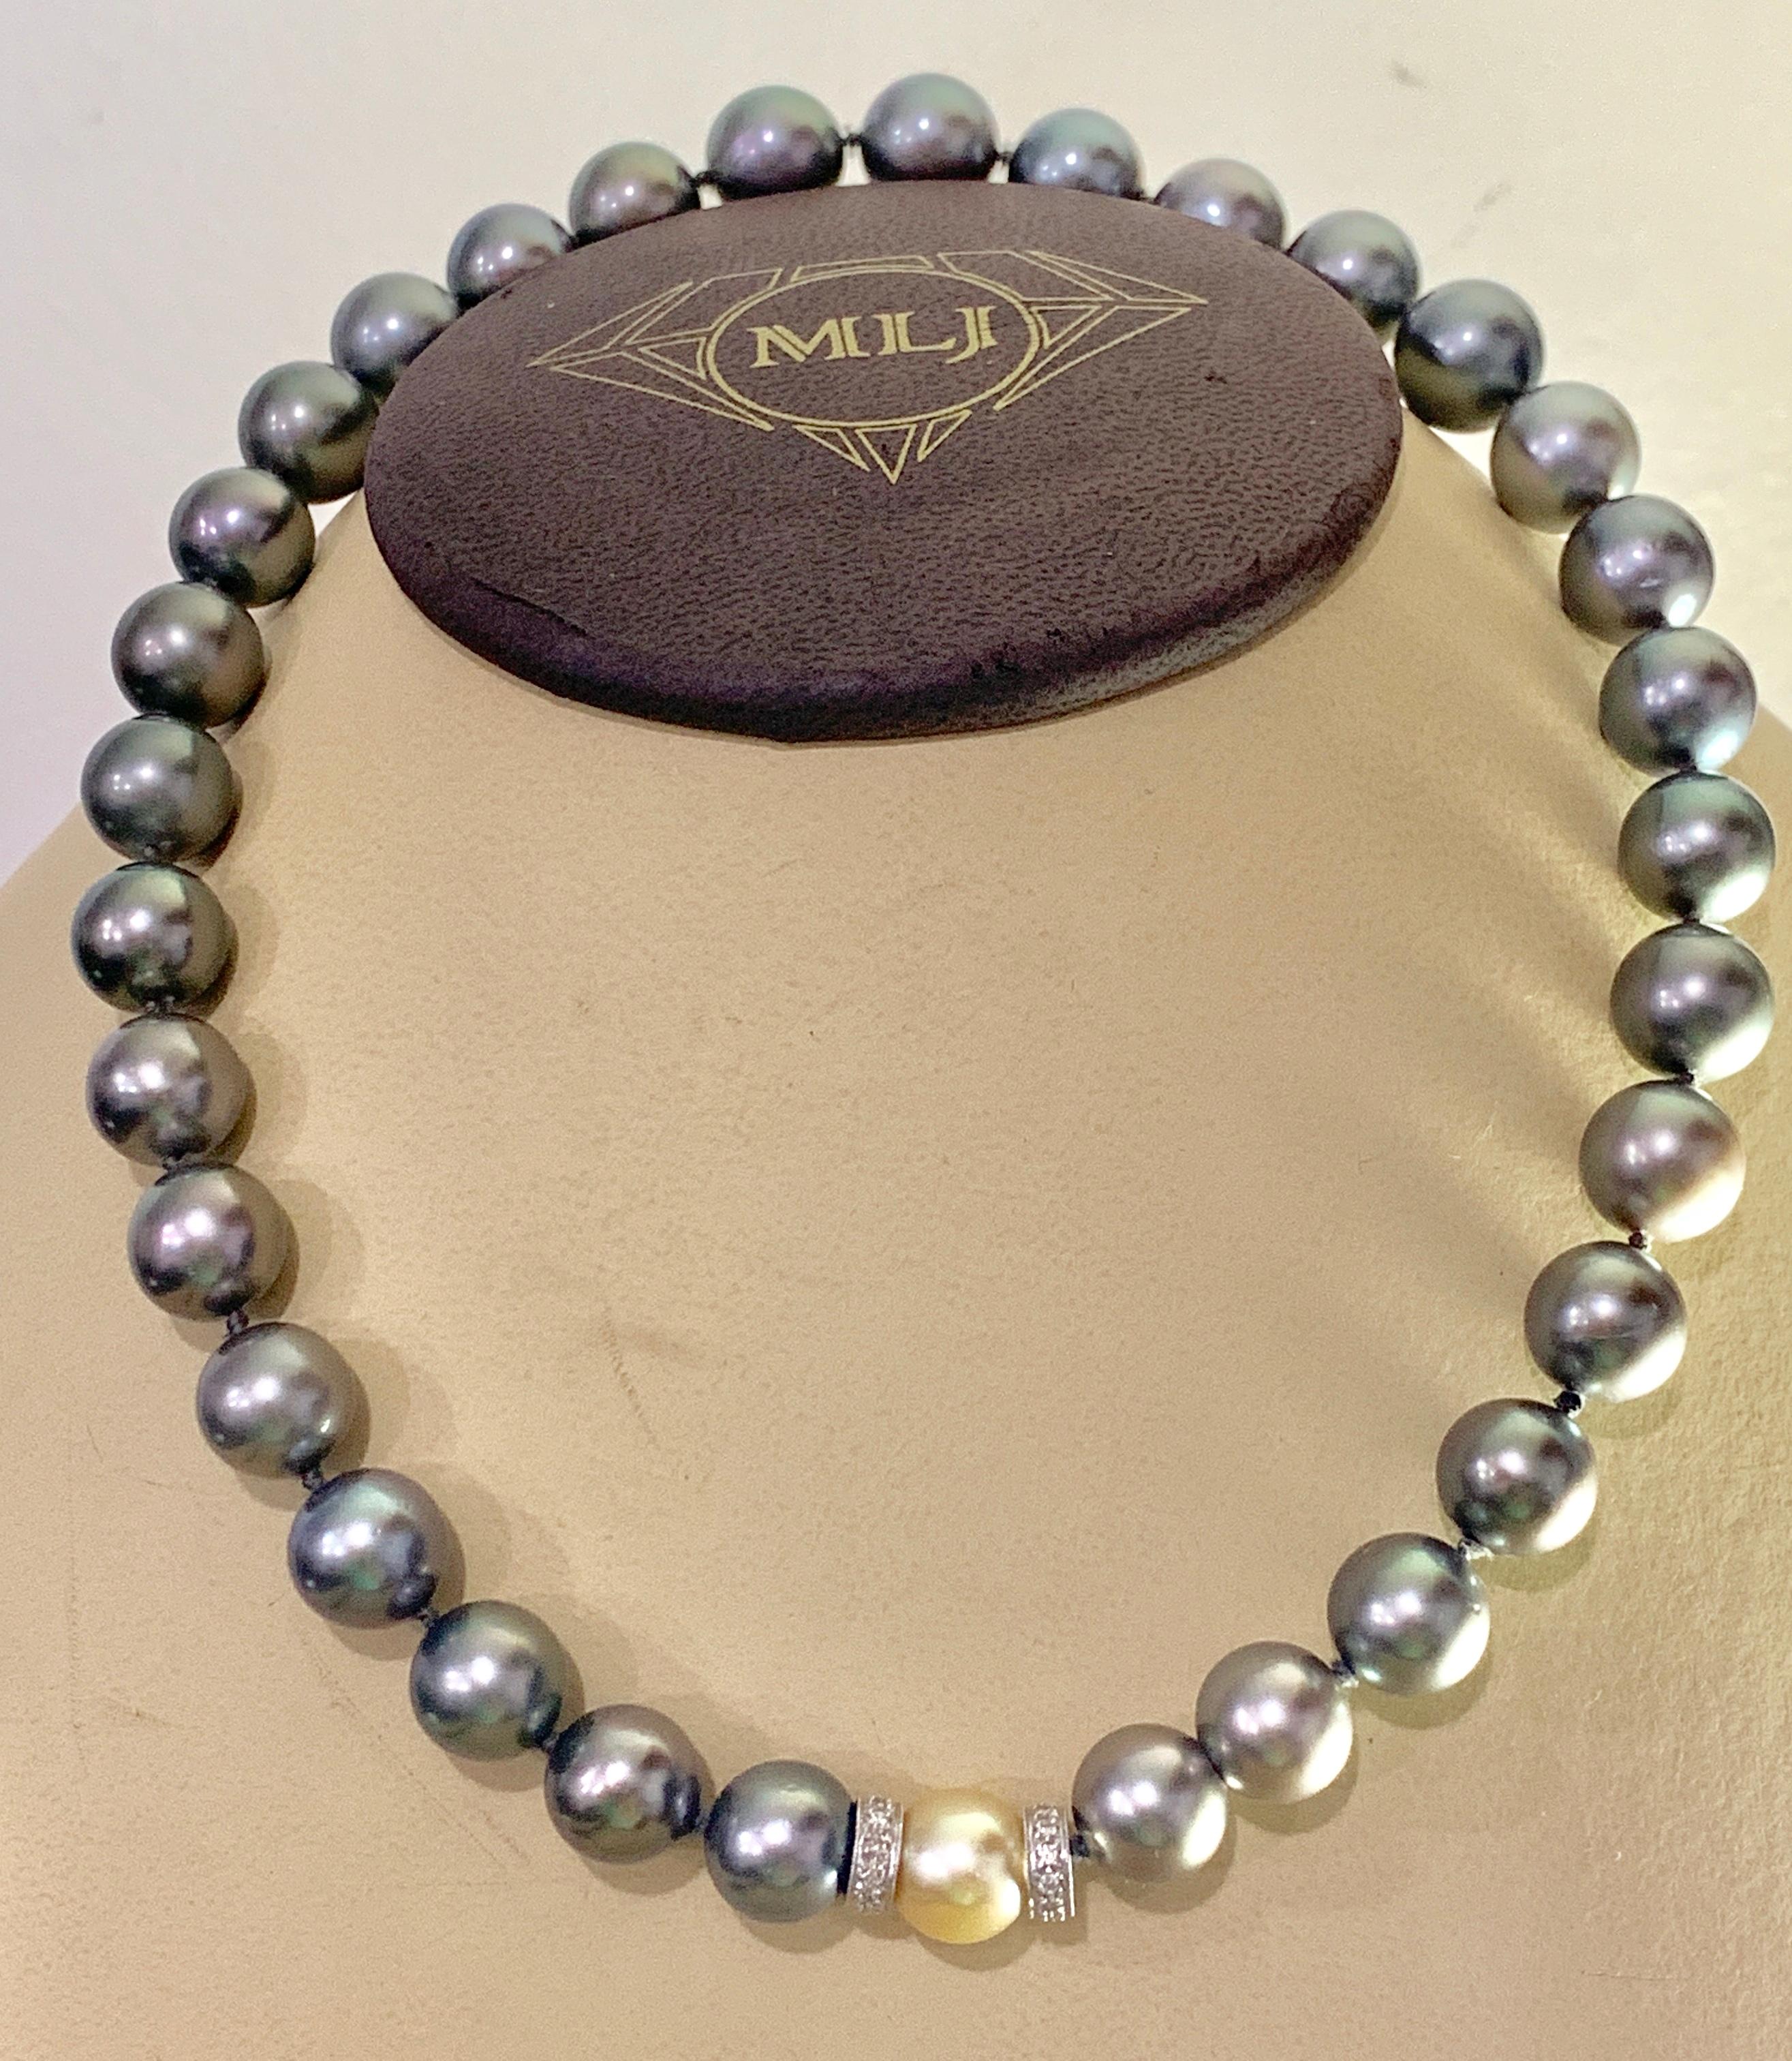 10 MM Tahitian Black Pearls Strand Necklace, Estate, 16 inch 1